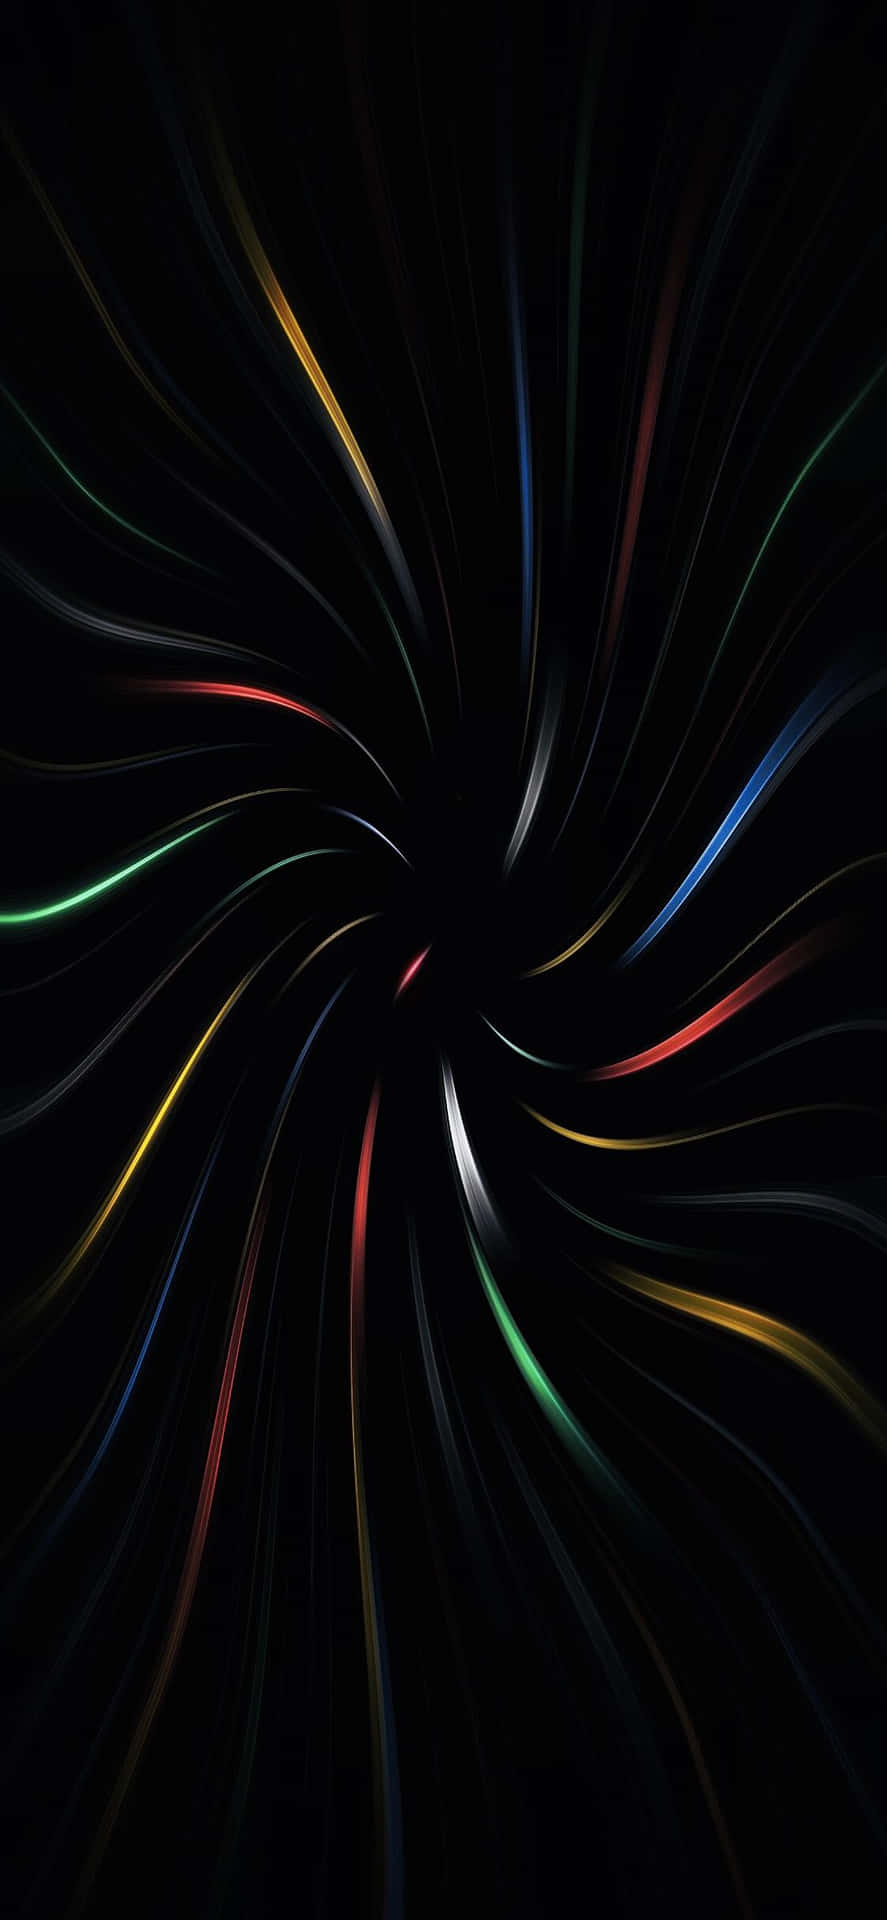 Free Abstract Iphone Wallpaper Downloads, [300+] Abstract Iphone Wallpapers  for FREE 